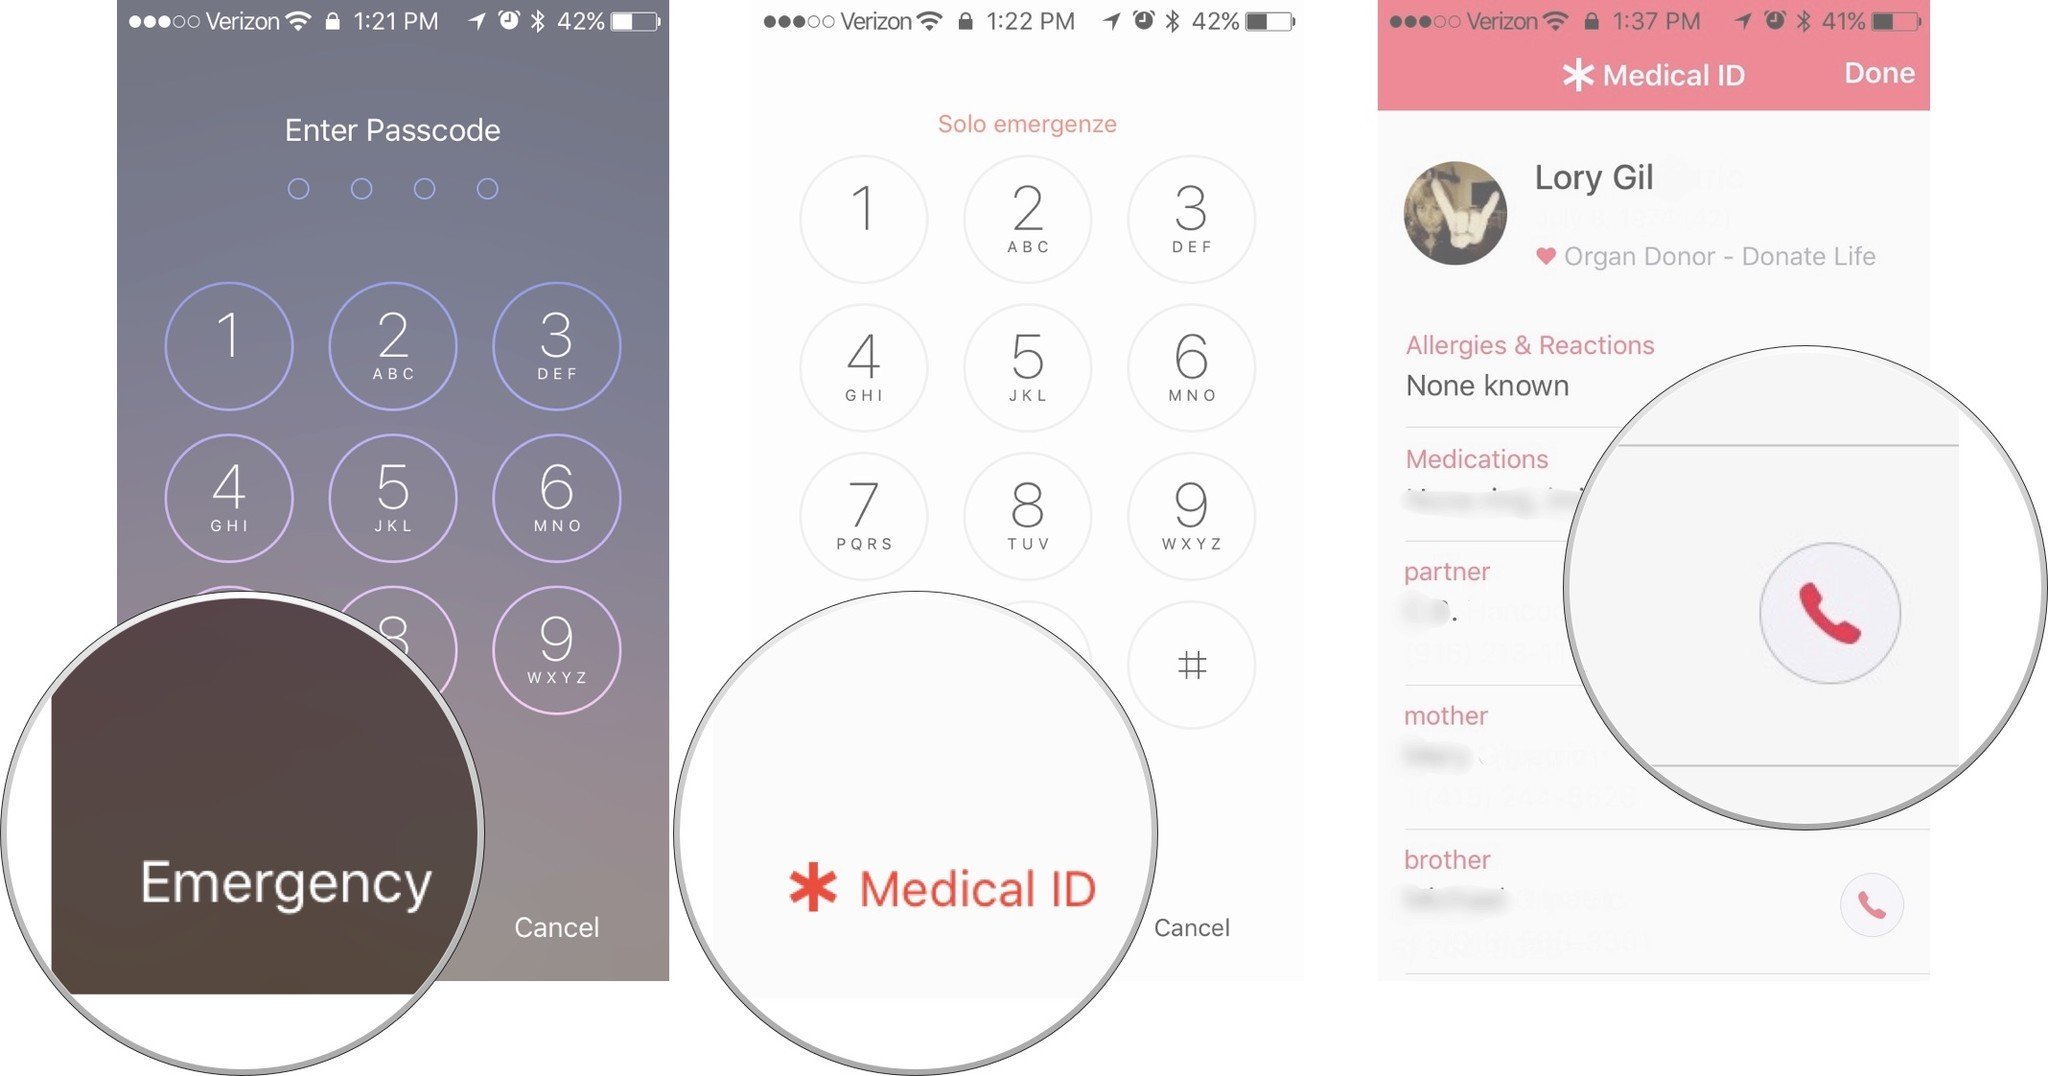 Tap Emergency, then tap Medical ID, then tap the Call icon